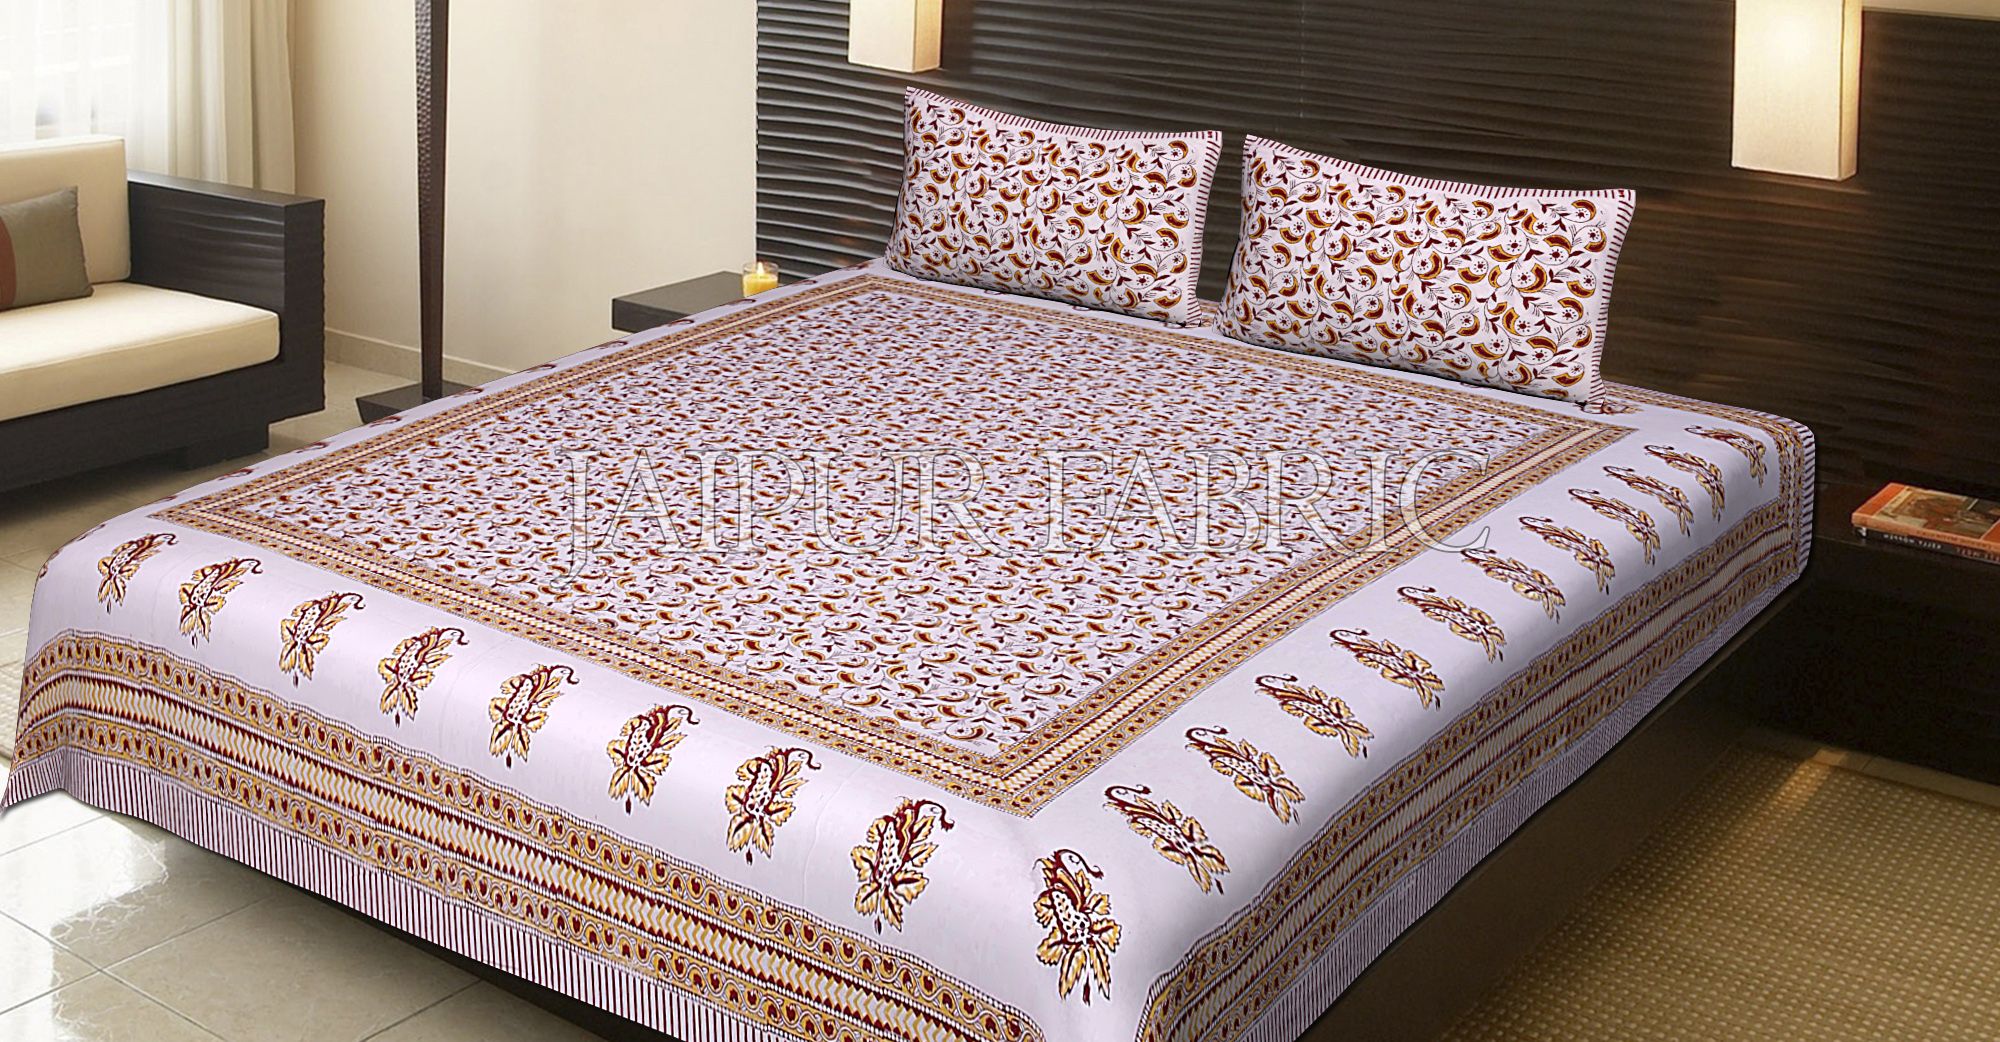 Lining Border Leaf Pattern Block Print Cotton Double Bed Sheet